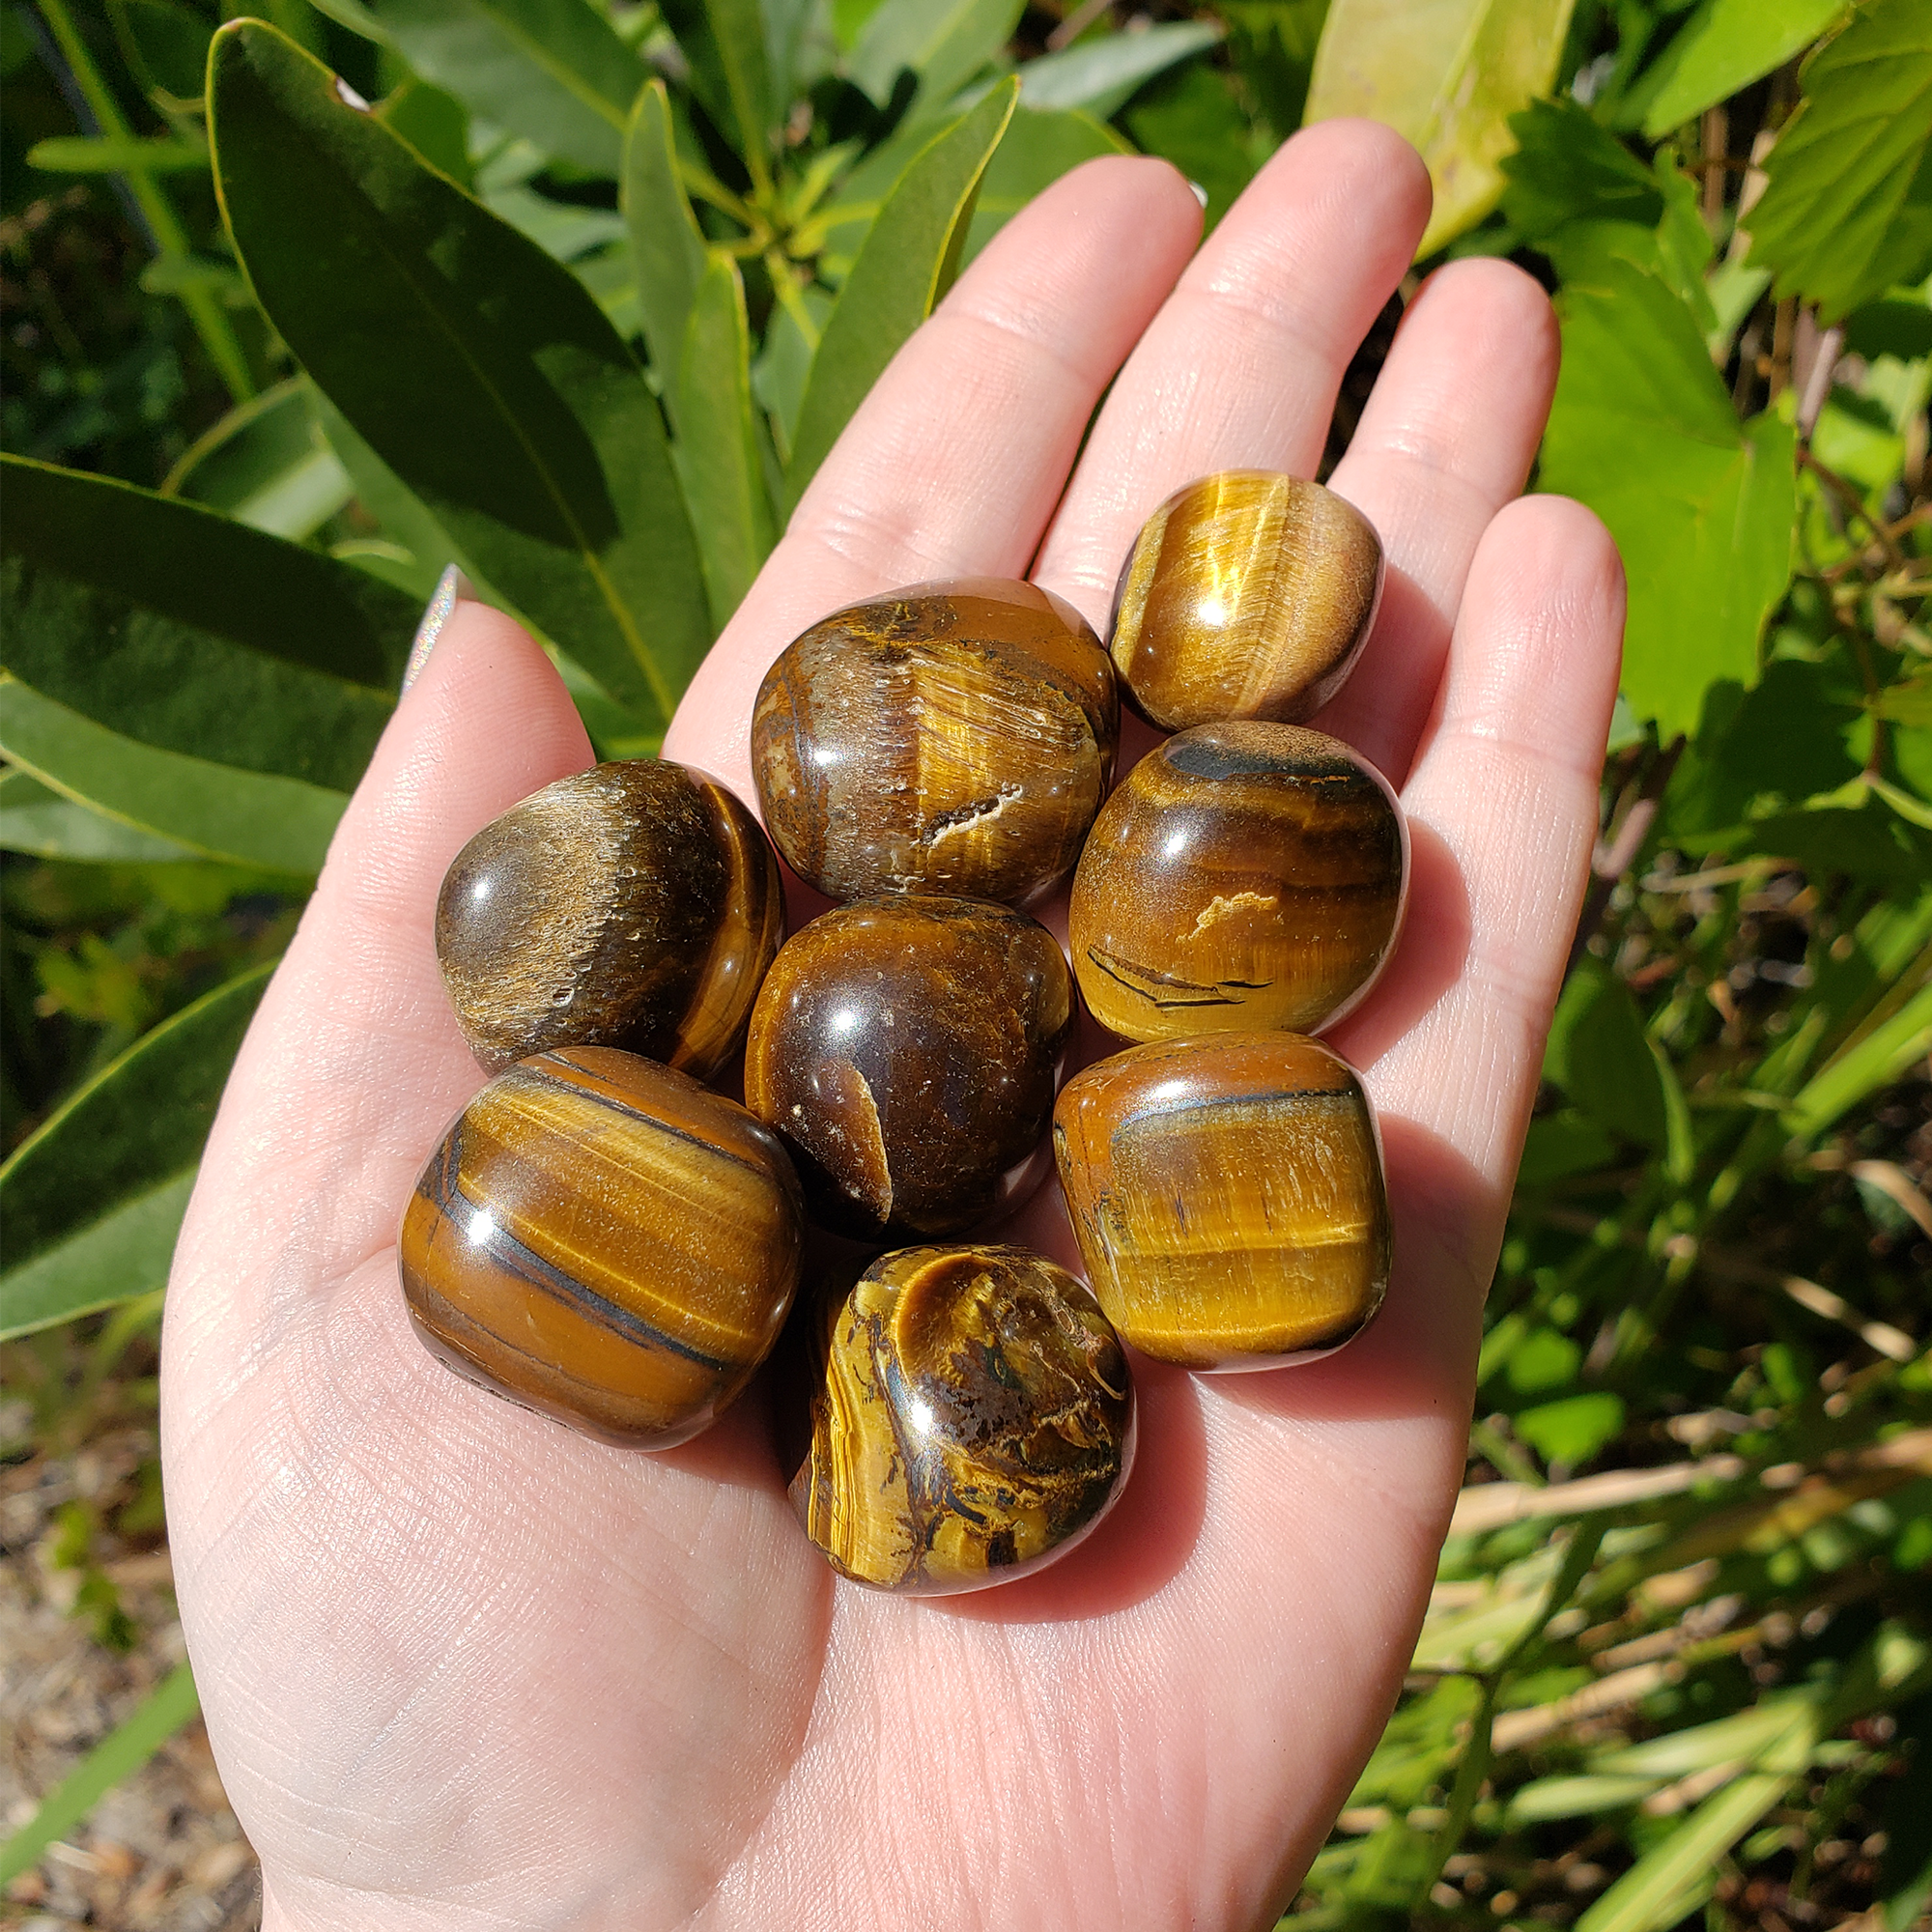 Tigers Eye Natural Tumbled Crystal - One Stone - Bright Sunlight